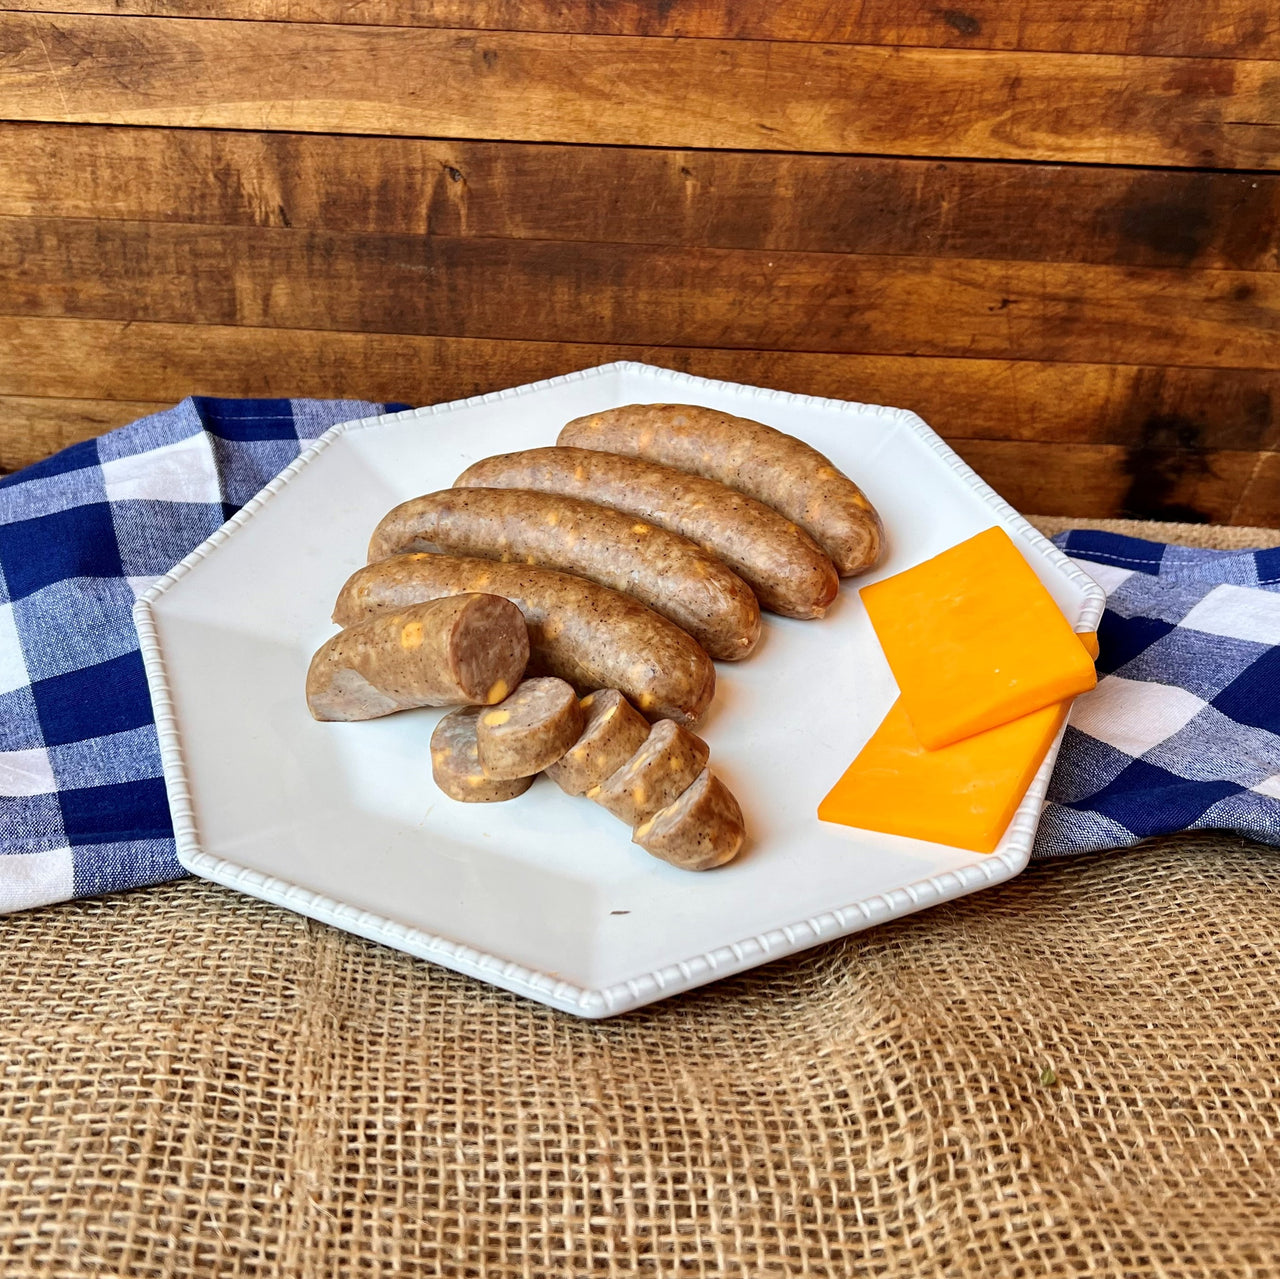 Smoked Cheddar Bratwurst 3 - 1 lb. Packages